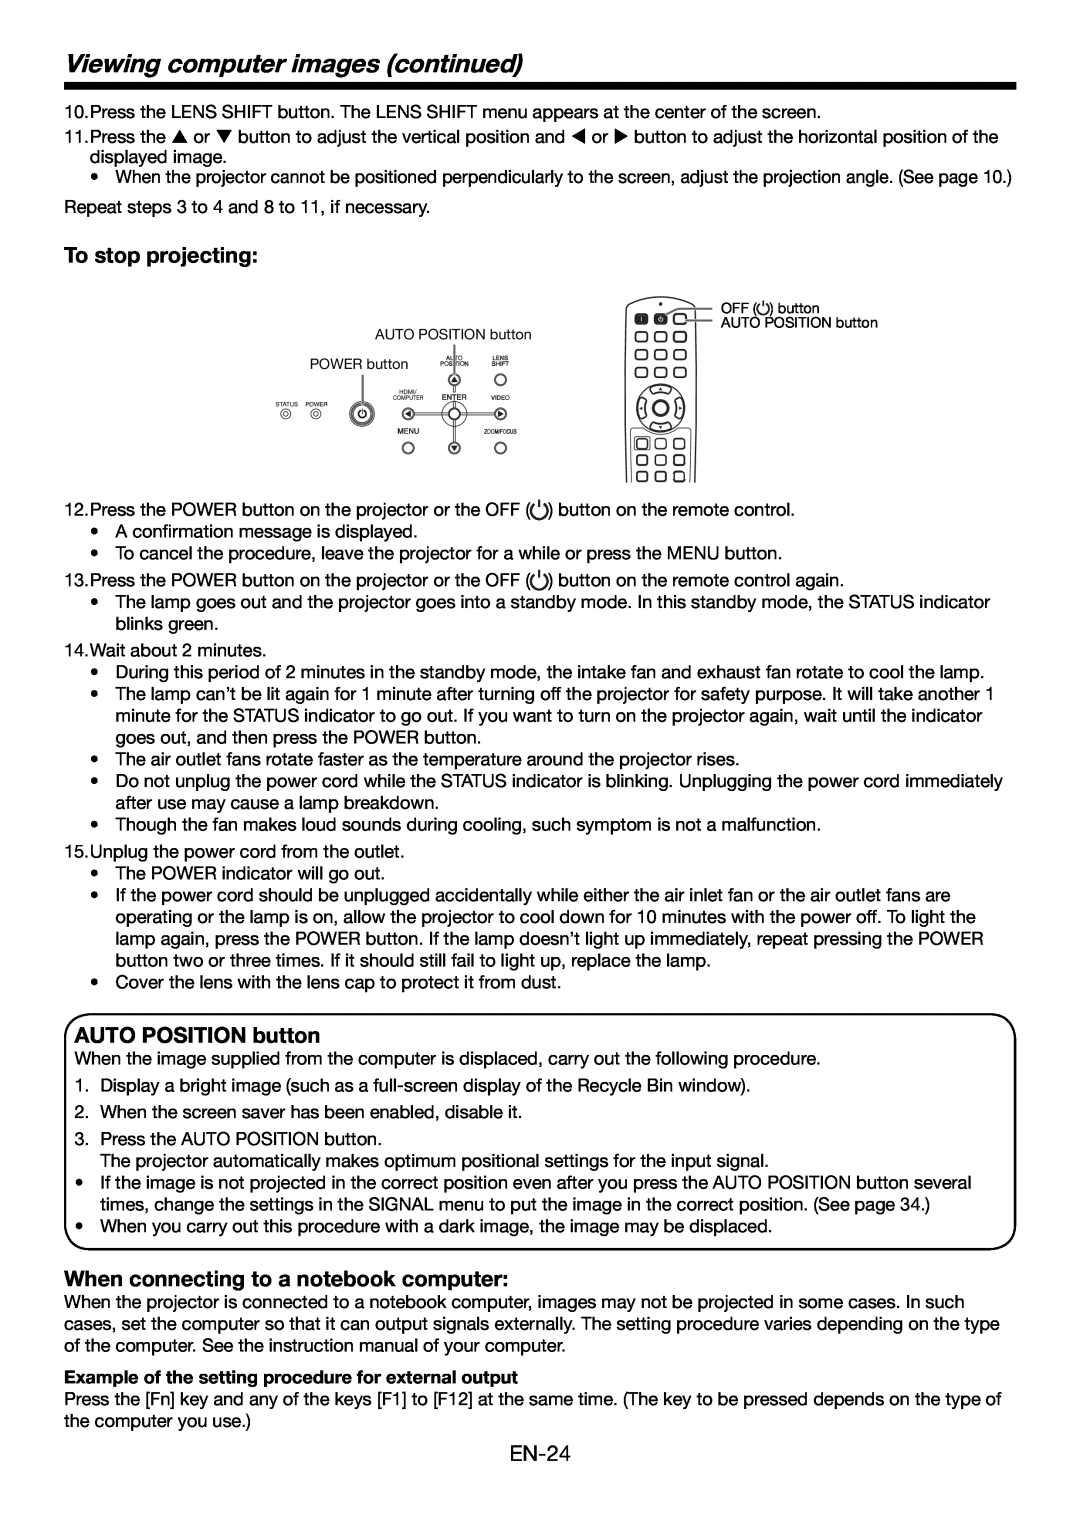 Mitsubishi Electronics HC6000 user manual AUTO POSITION button, When connecting to a notebook computer, To stop projecting 